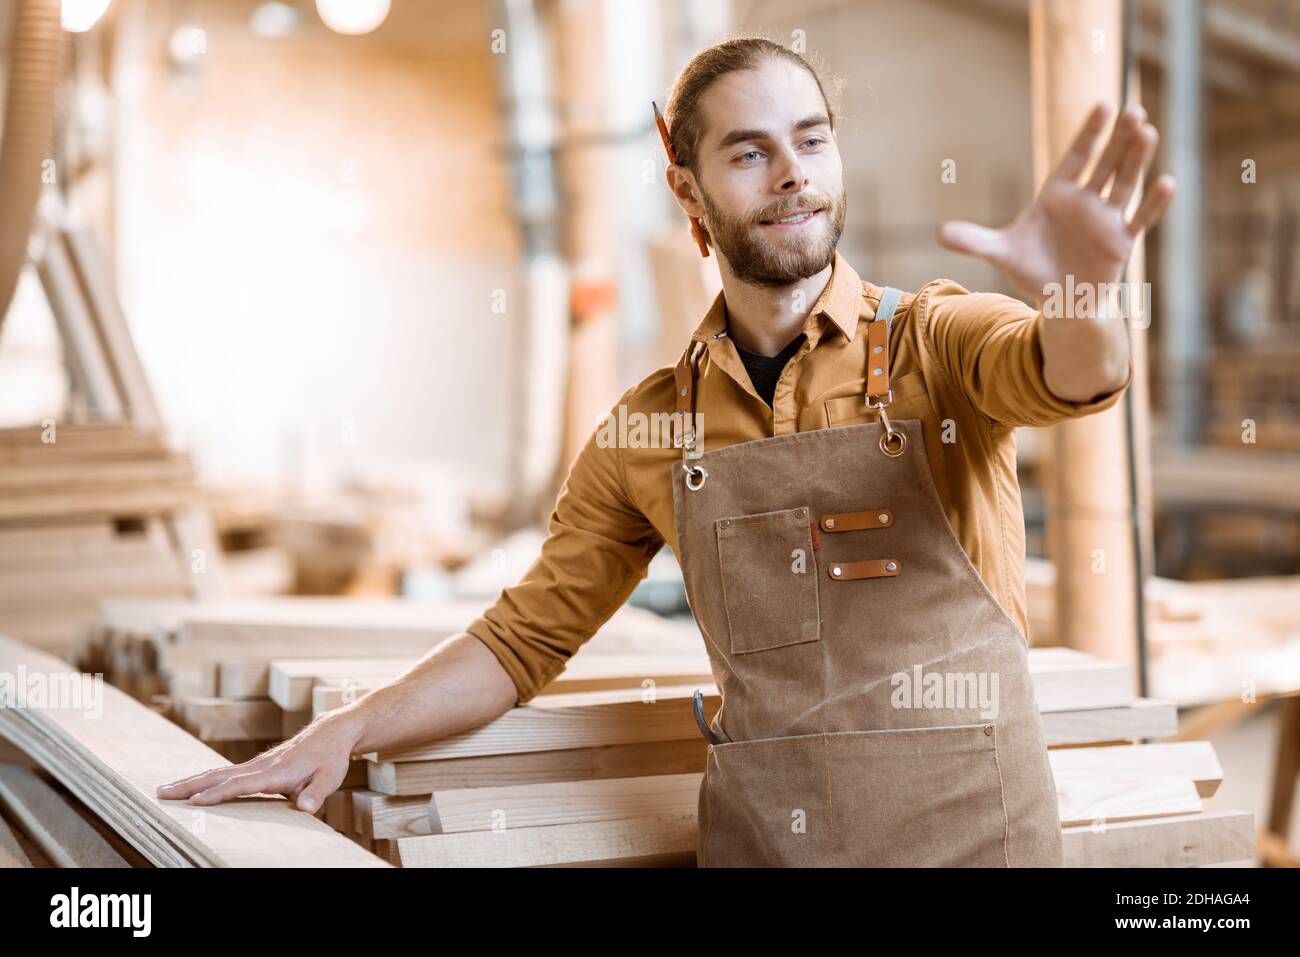 Handsome carpenter designing some woodwork at the workshop. Concept of augmented reality in carpentry Stock Photo